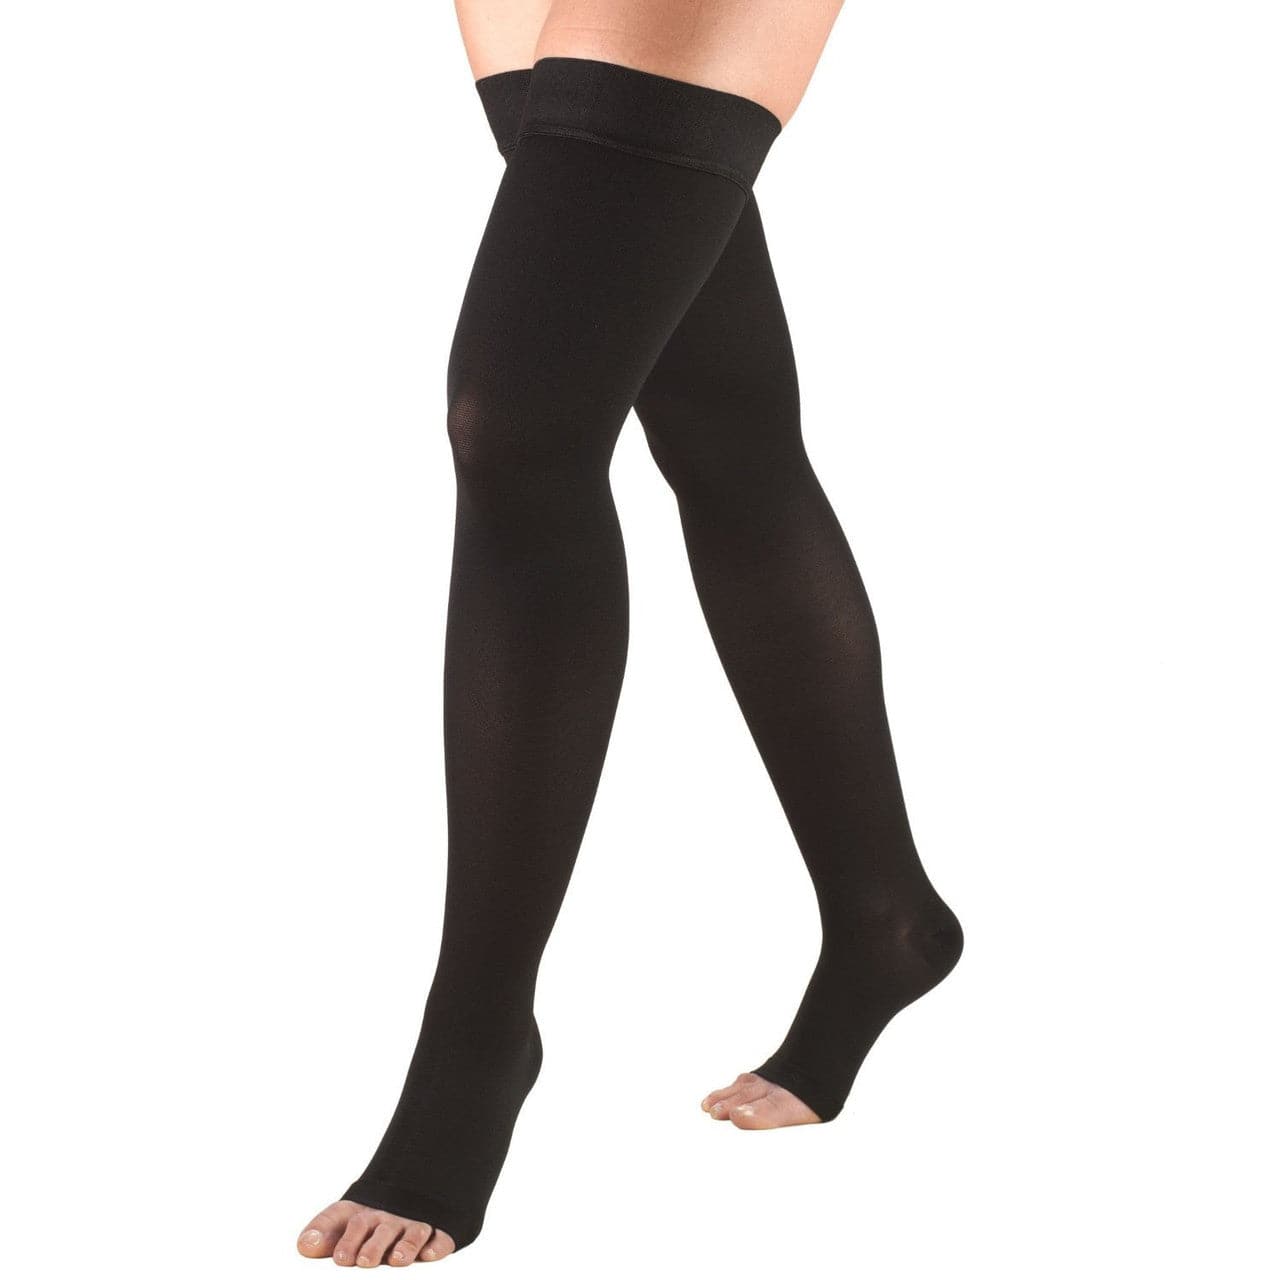 Airway Surgical Truform Thigh High Open Toe Stockings Unisex 20-30